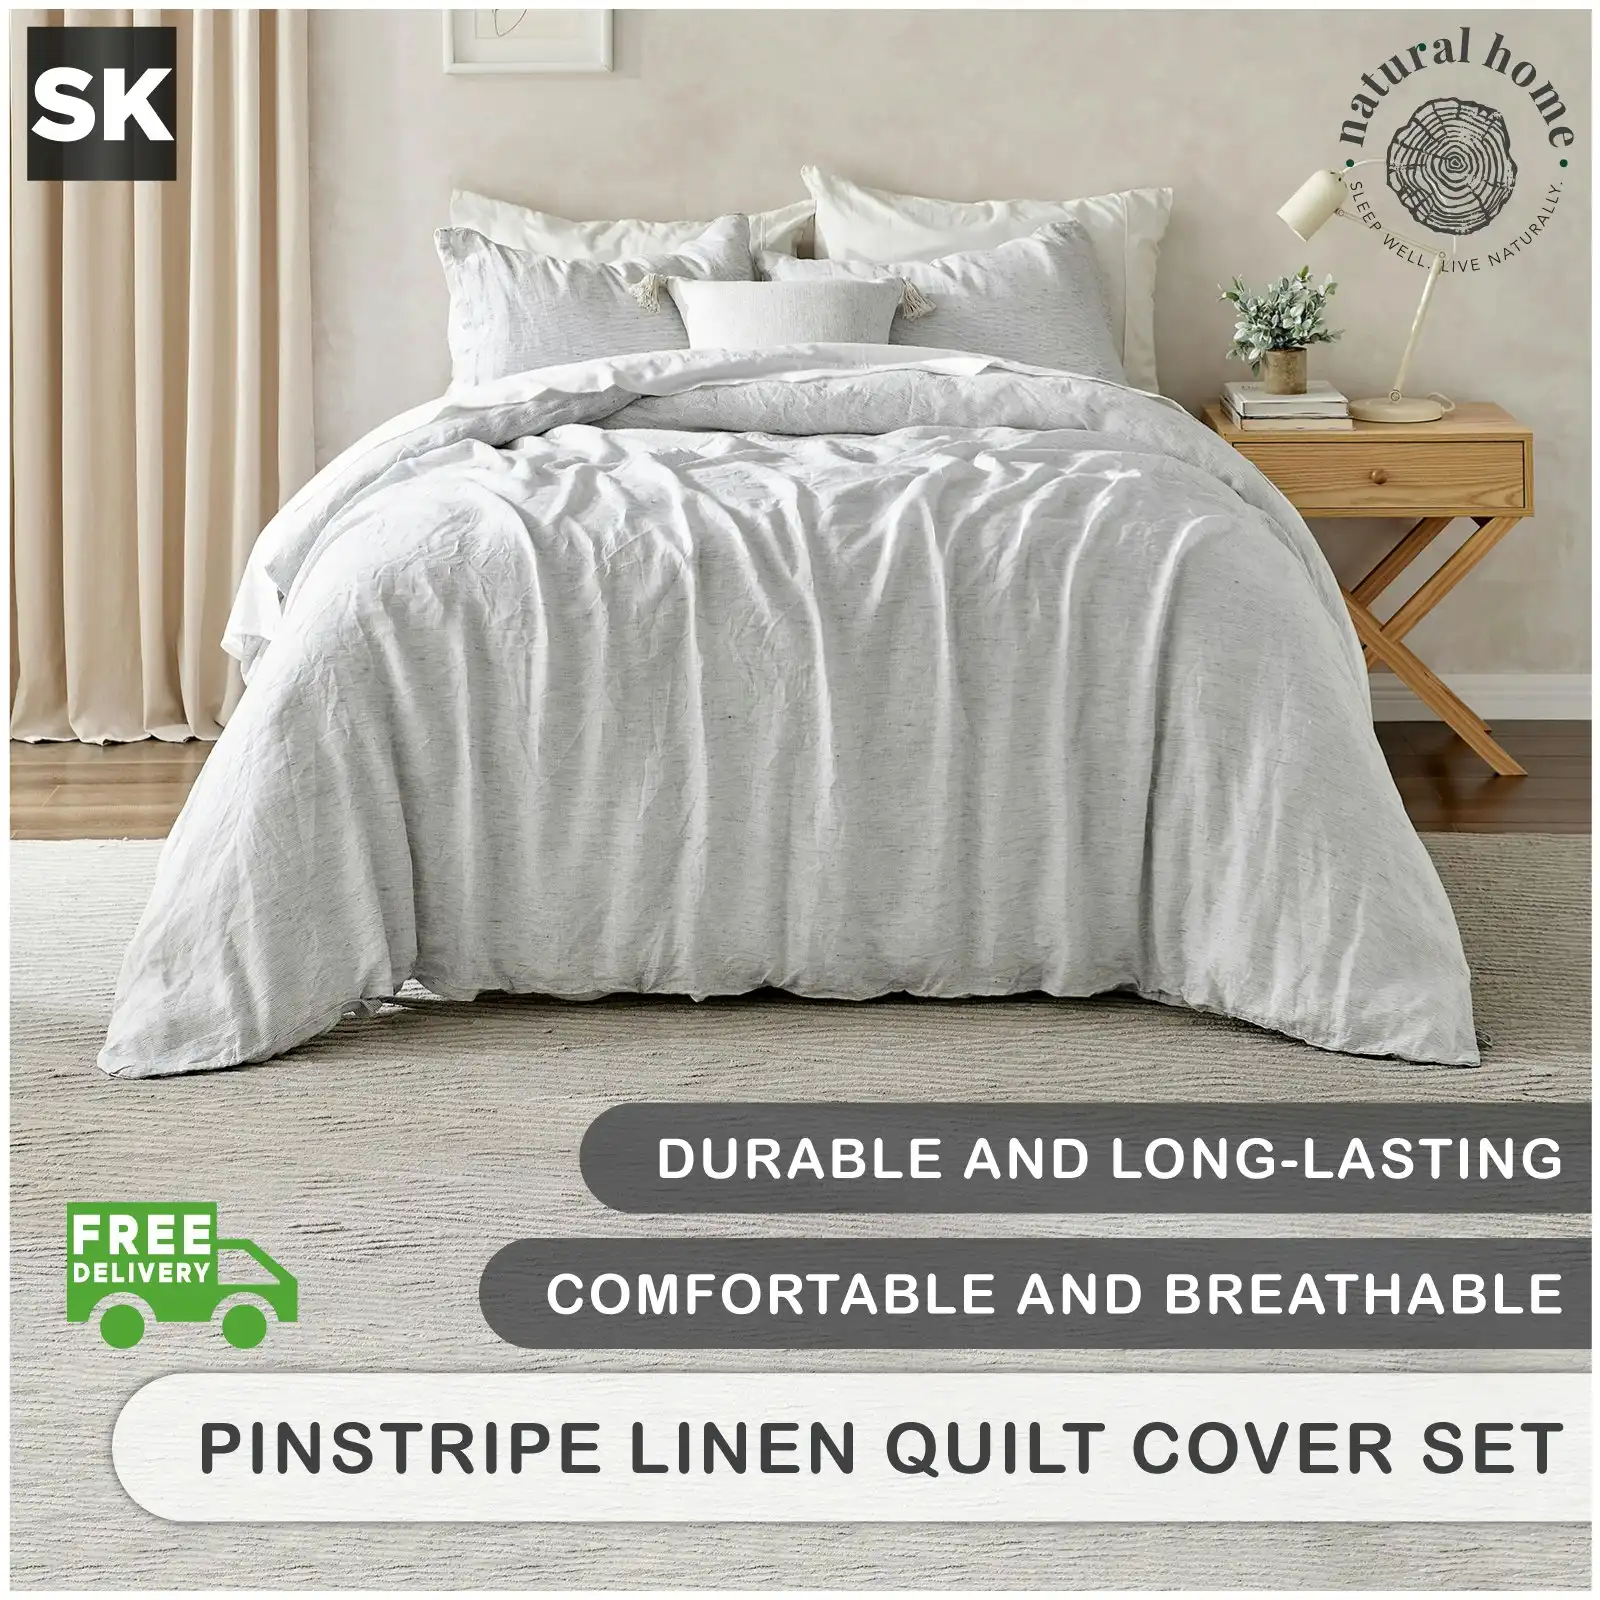 Natural Home Classic Pinstripe Linen Quilt Cover Set Dark with White Pinstripe Super King Bed